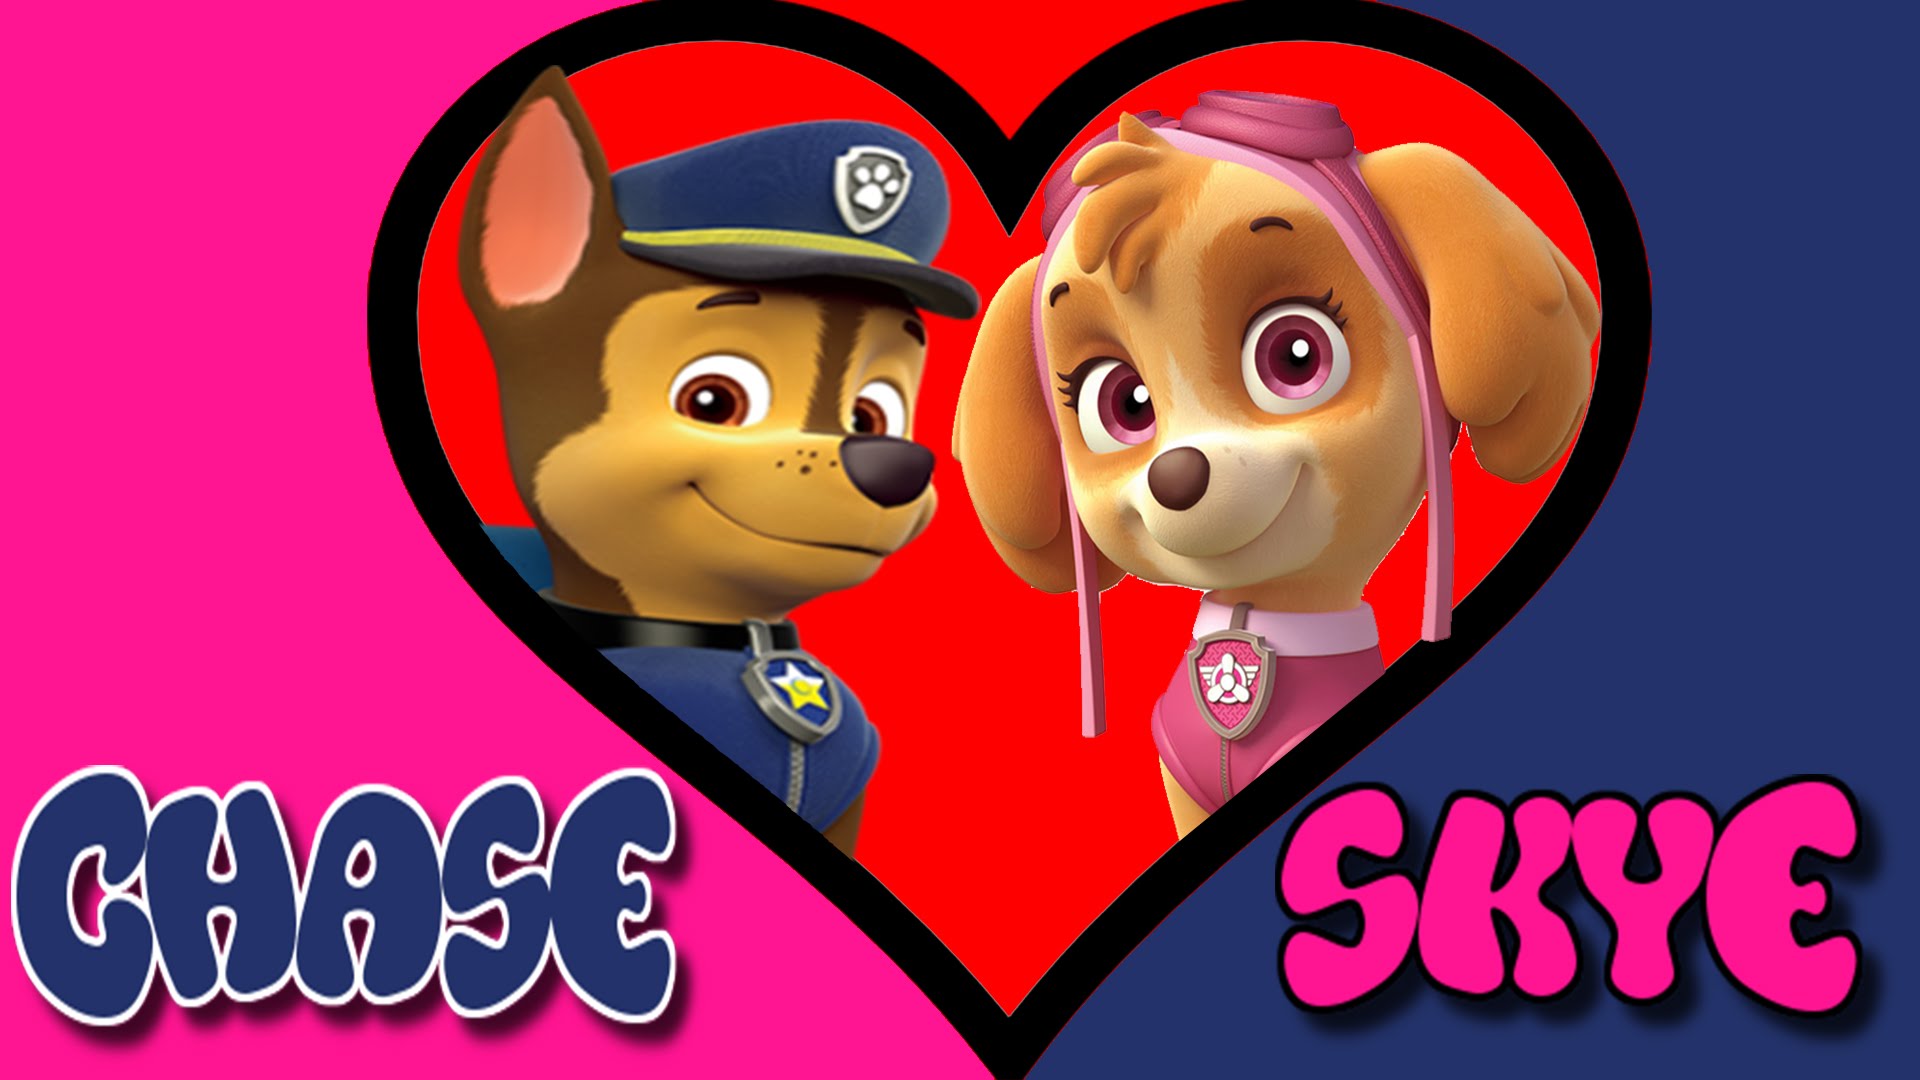 Skye and Chase - PAW Patrol Images on Fanpop.